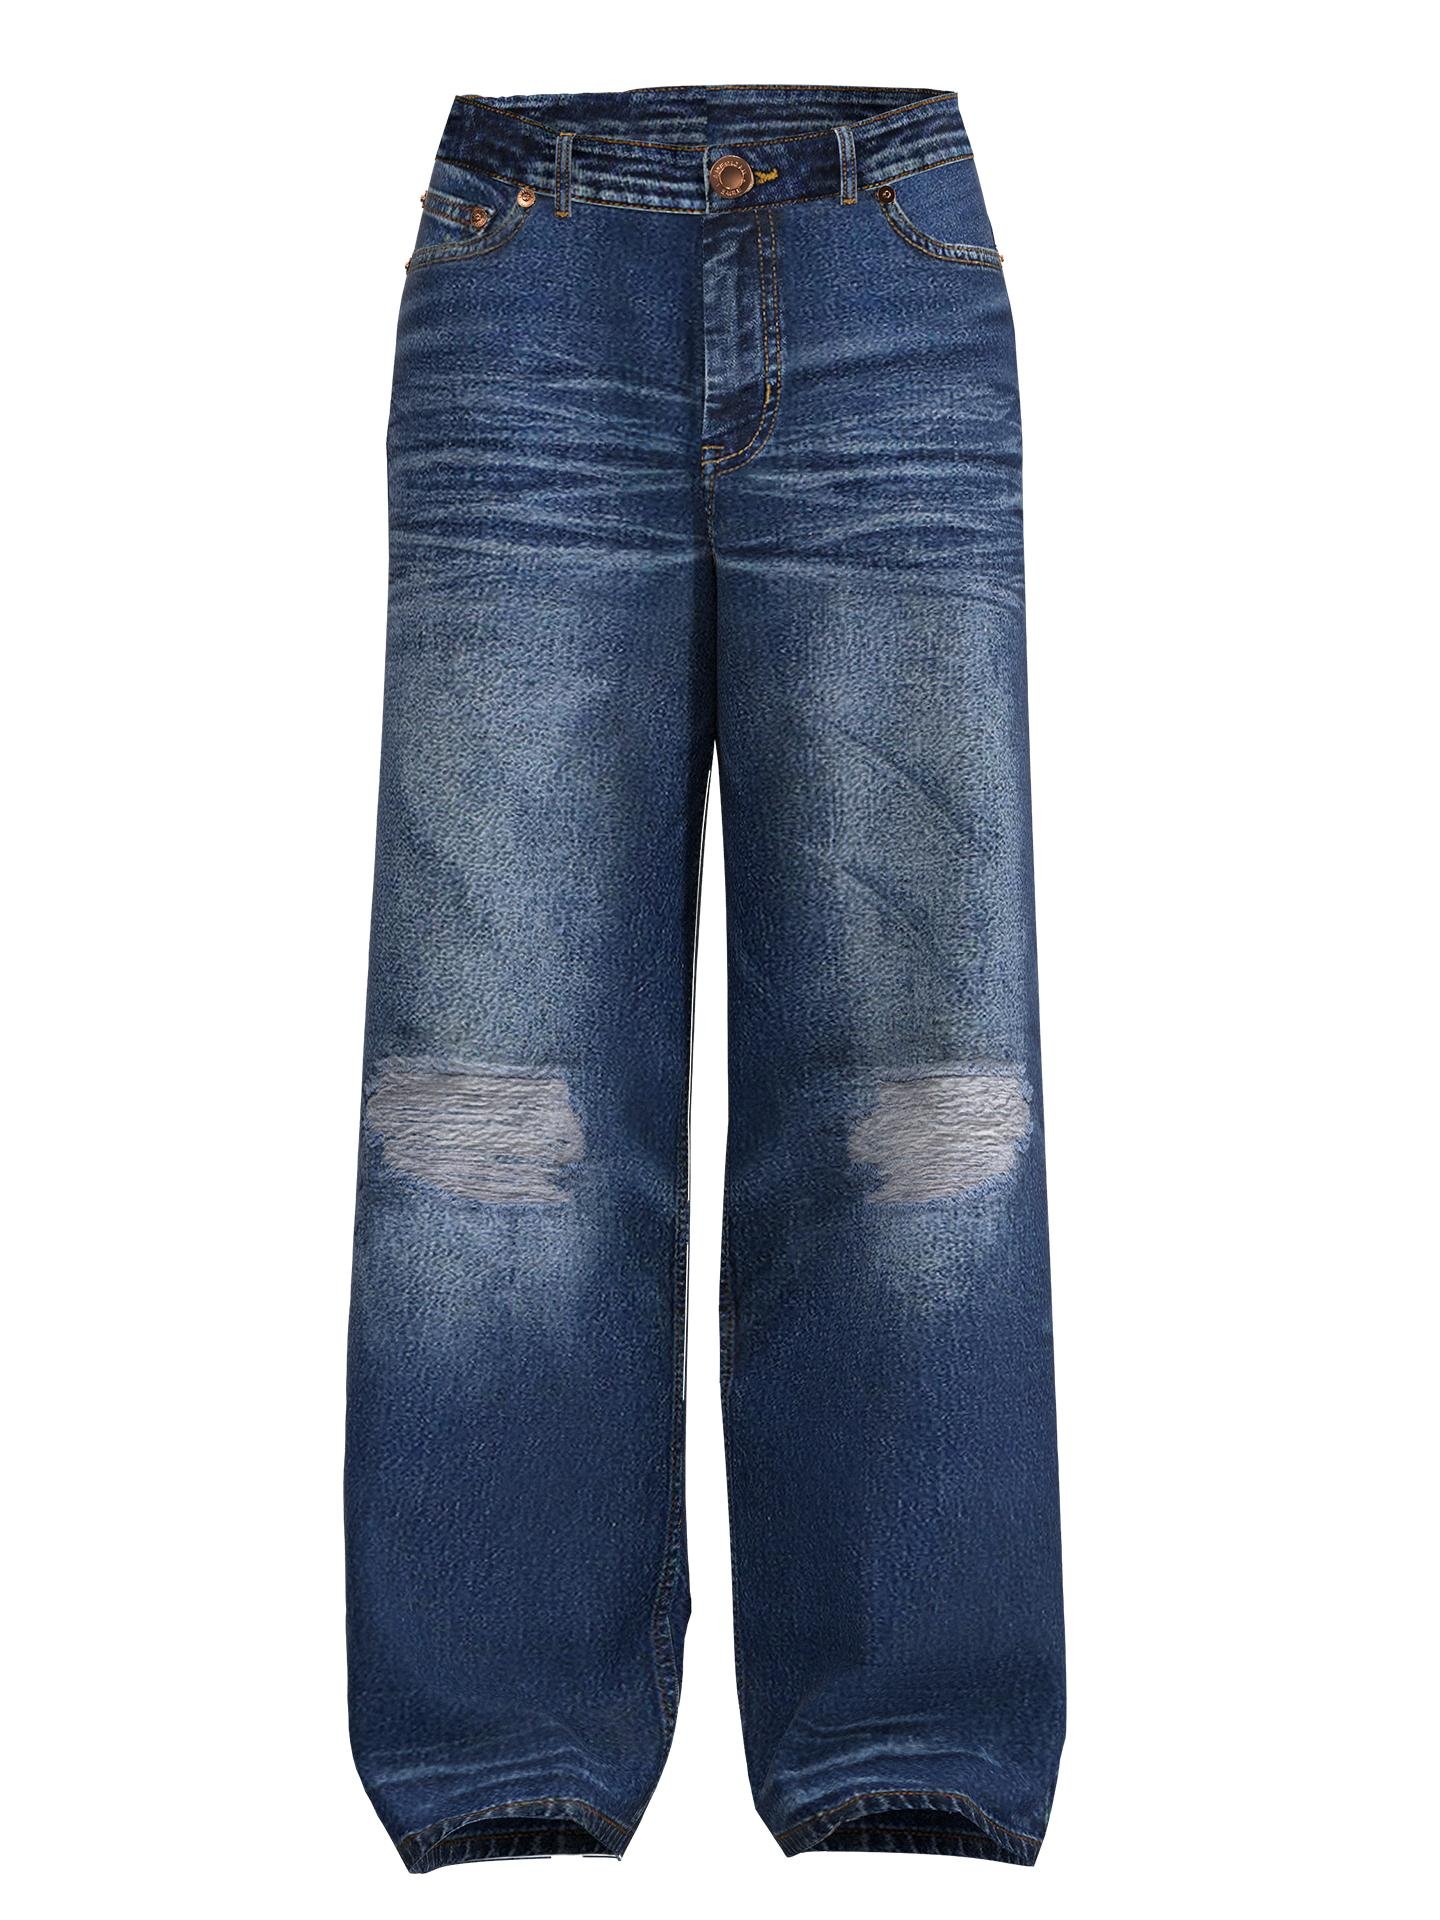 “Waterfall” Skater Jean by AMERICAN EAGLE